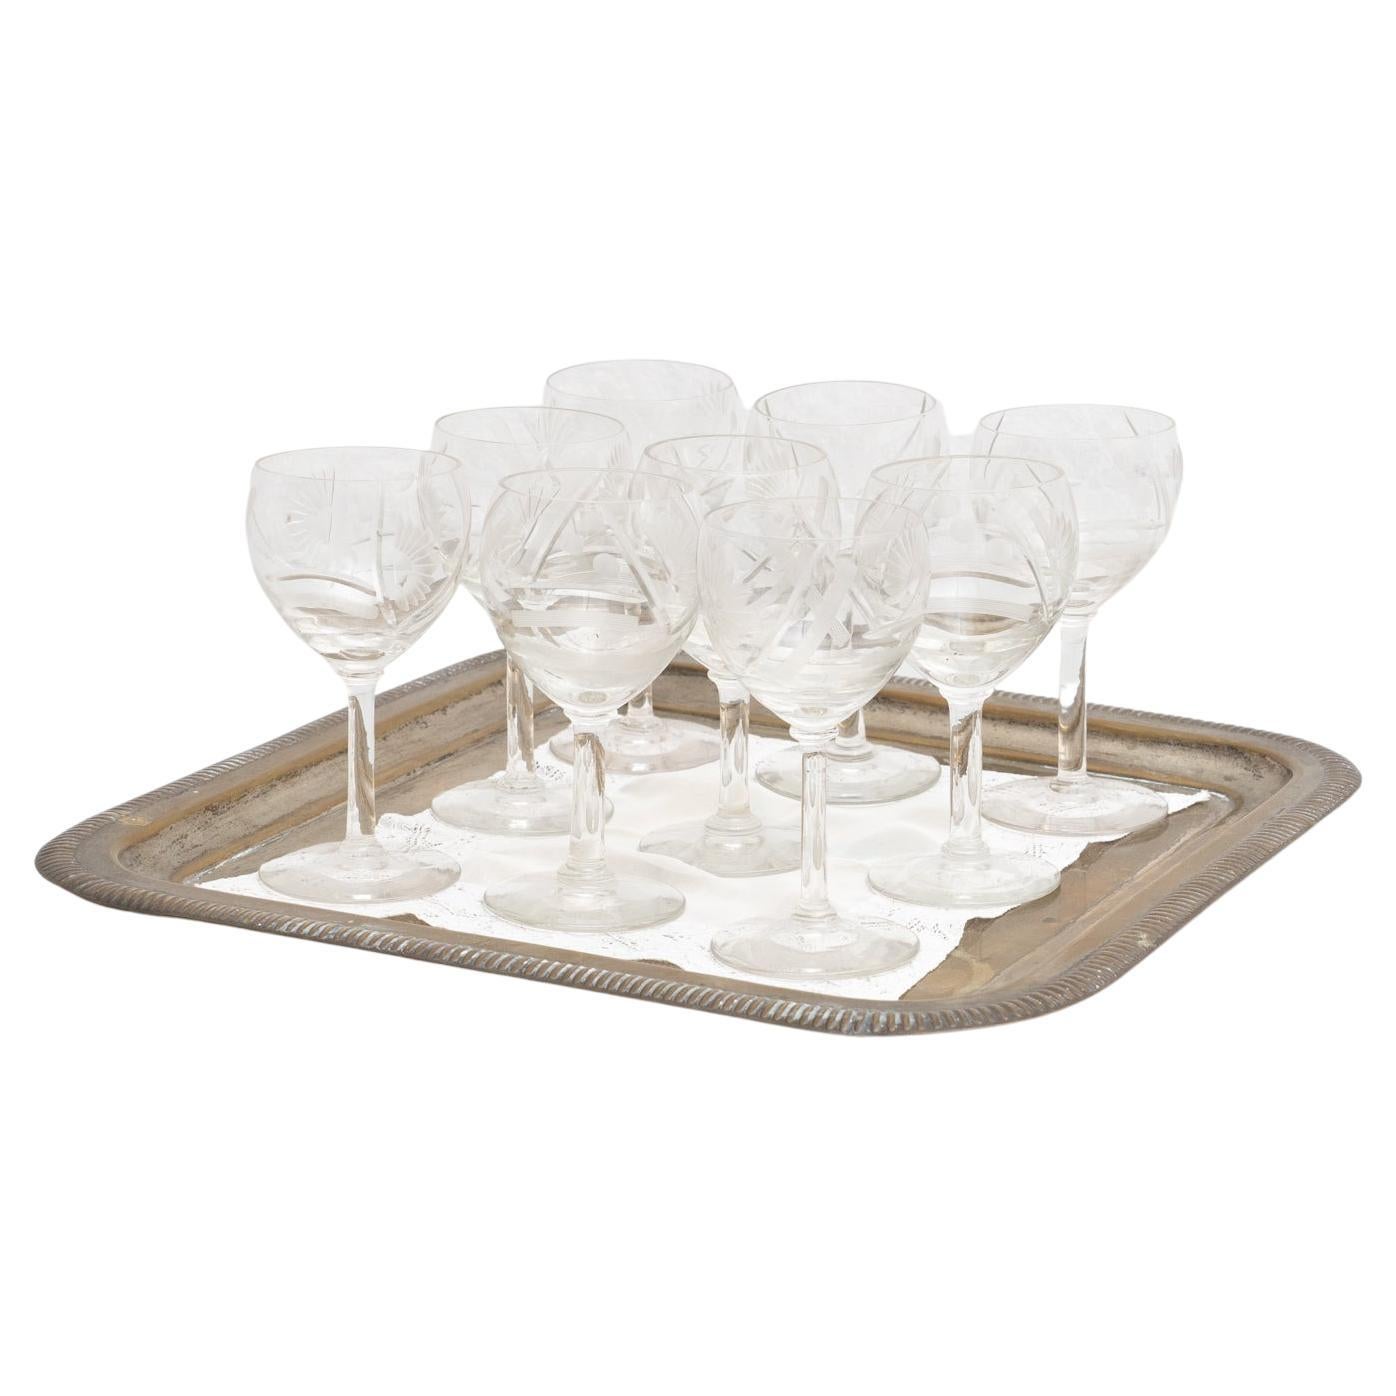 Early 20th century Set of 9 Antique French Glass Wine Cups with a Brass Tray For Sale